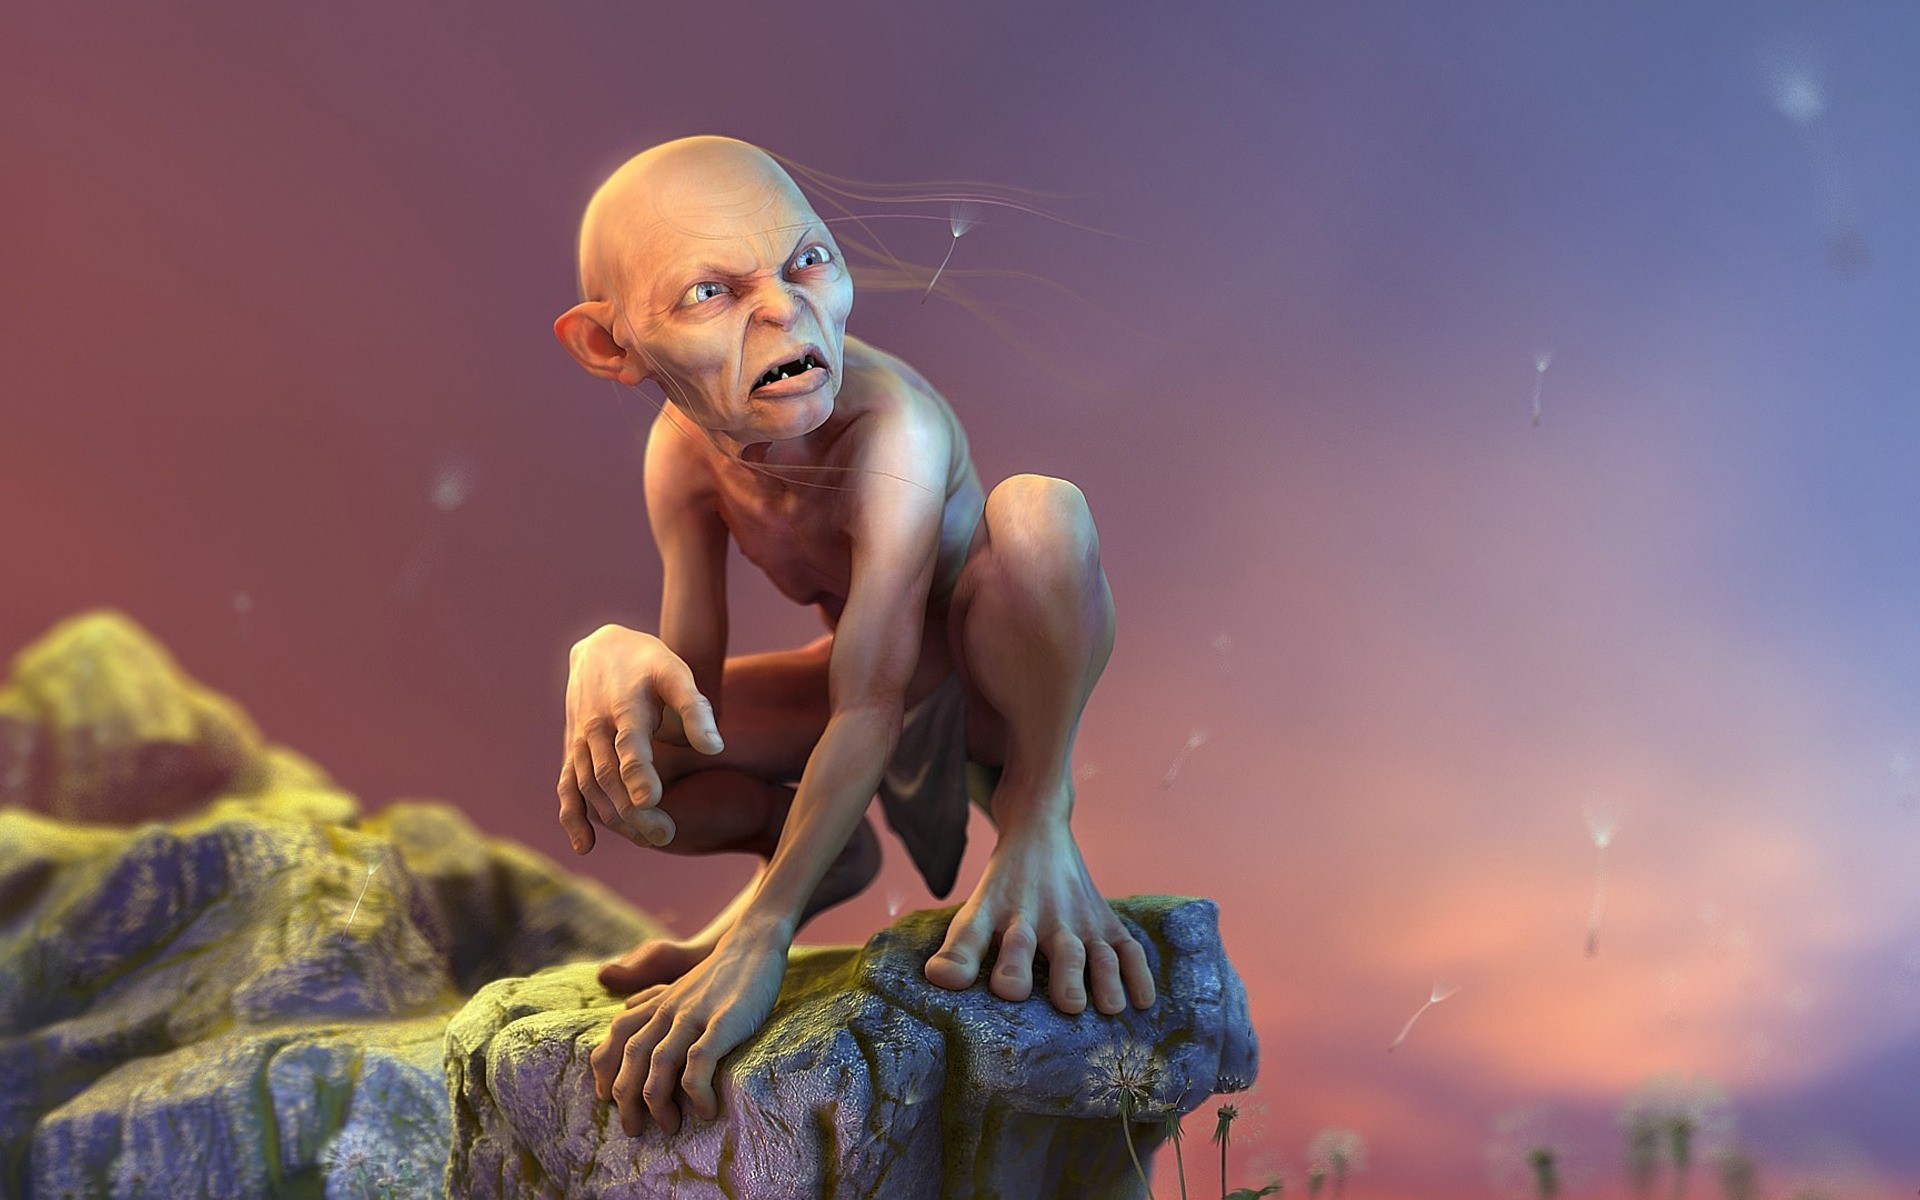 movies sculpture art adult statue nude one religion man travel lord rings precious gollum